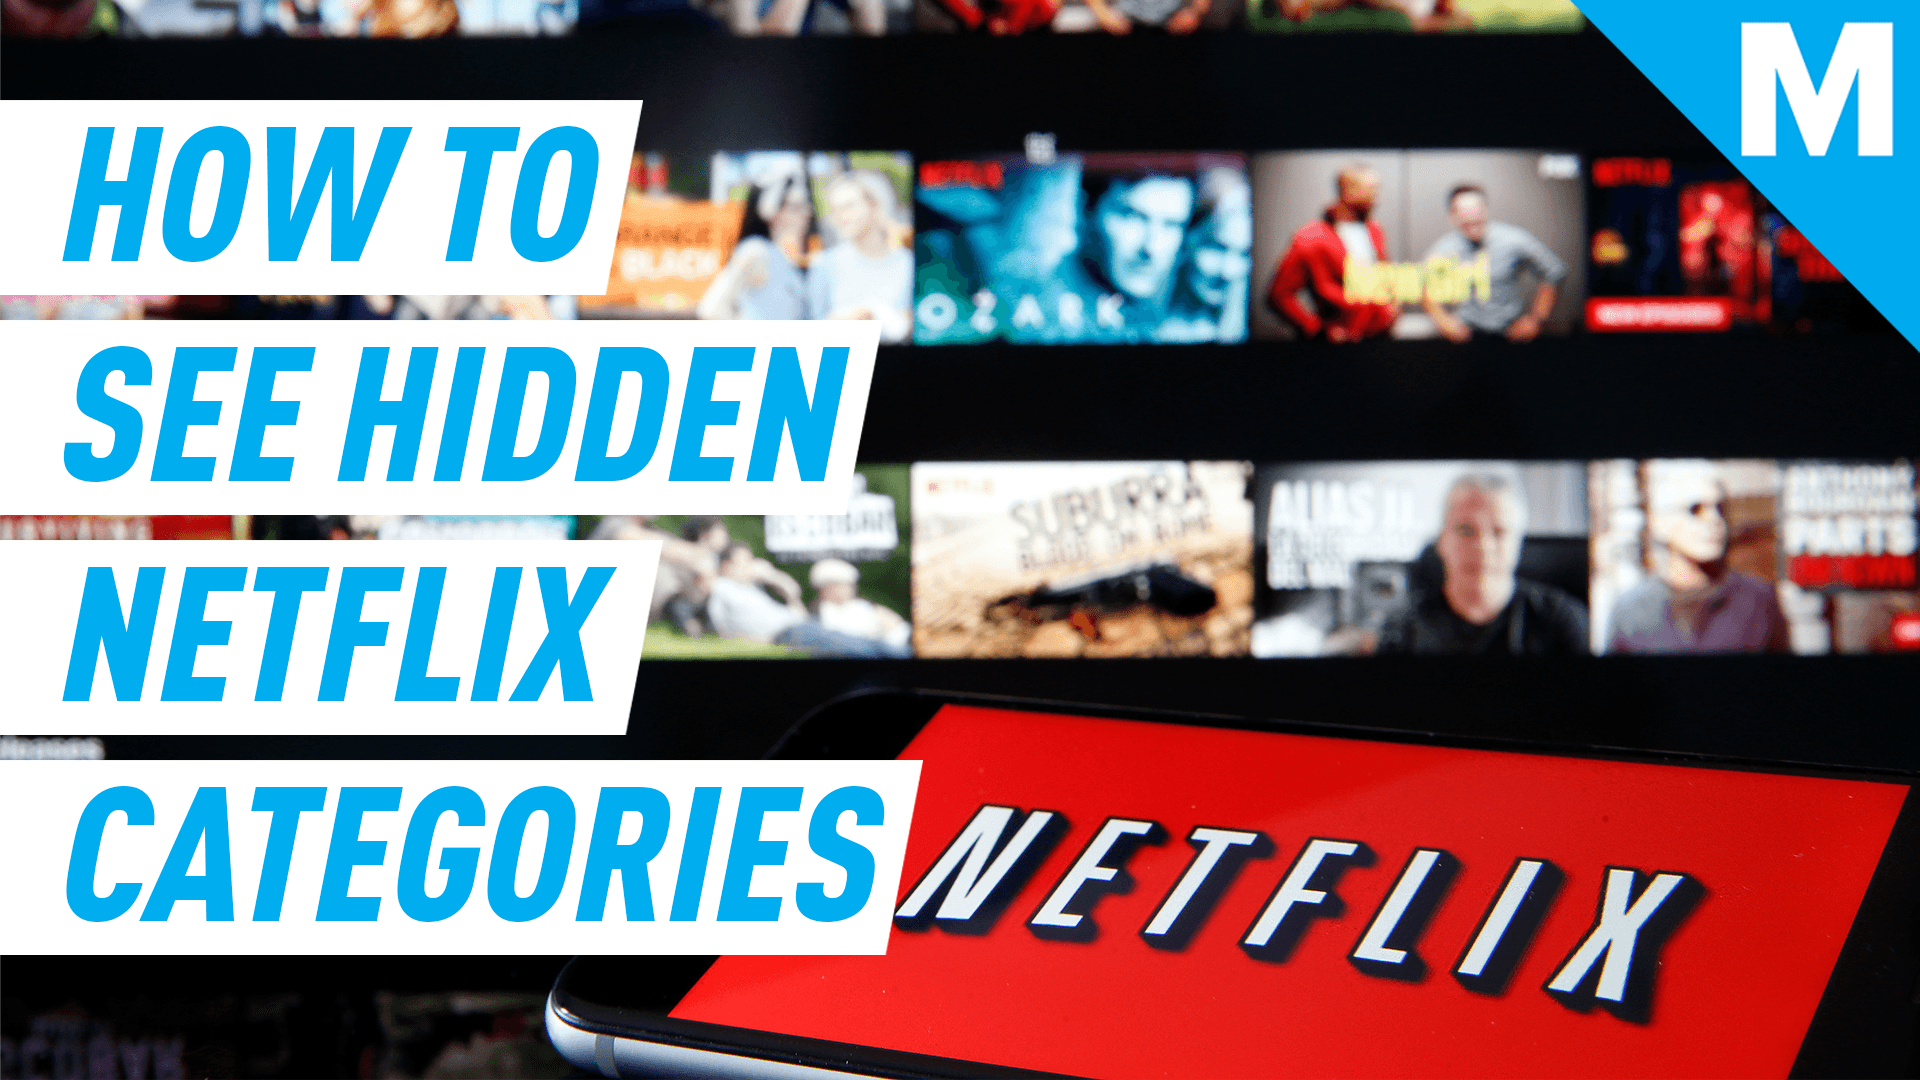 Netflix Has Tons Of Hidden Categories— Here’s How To See Them